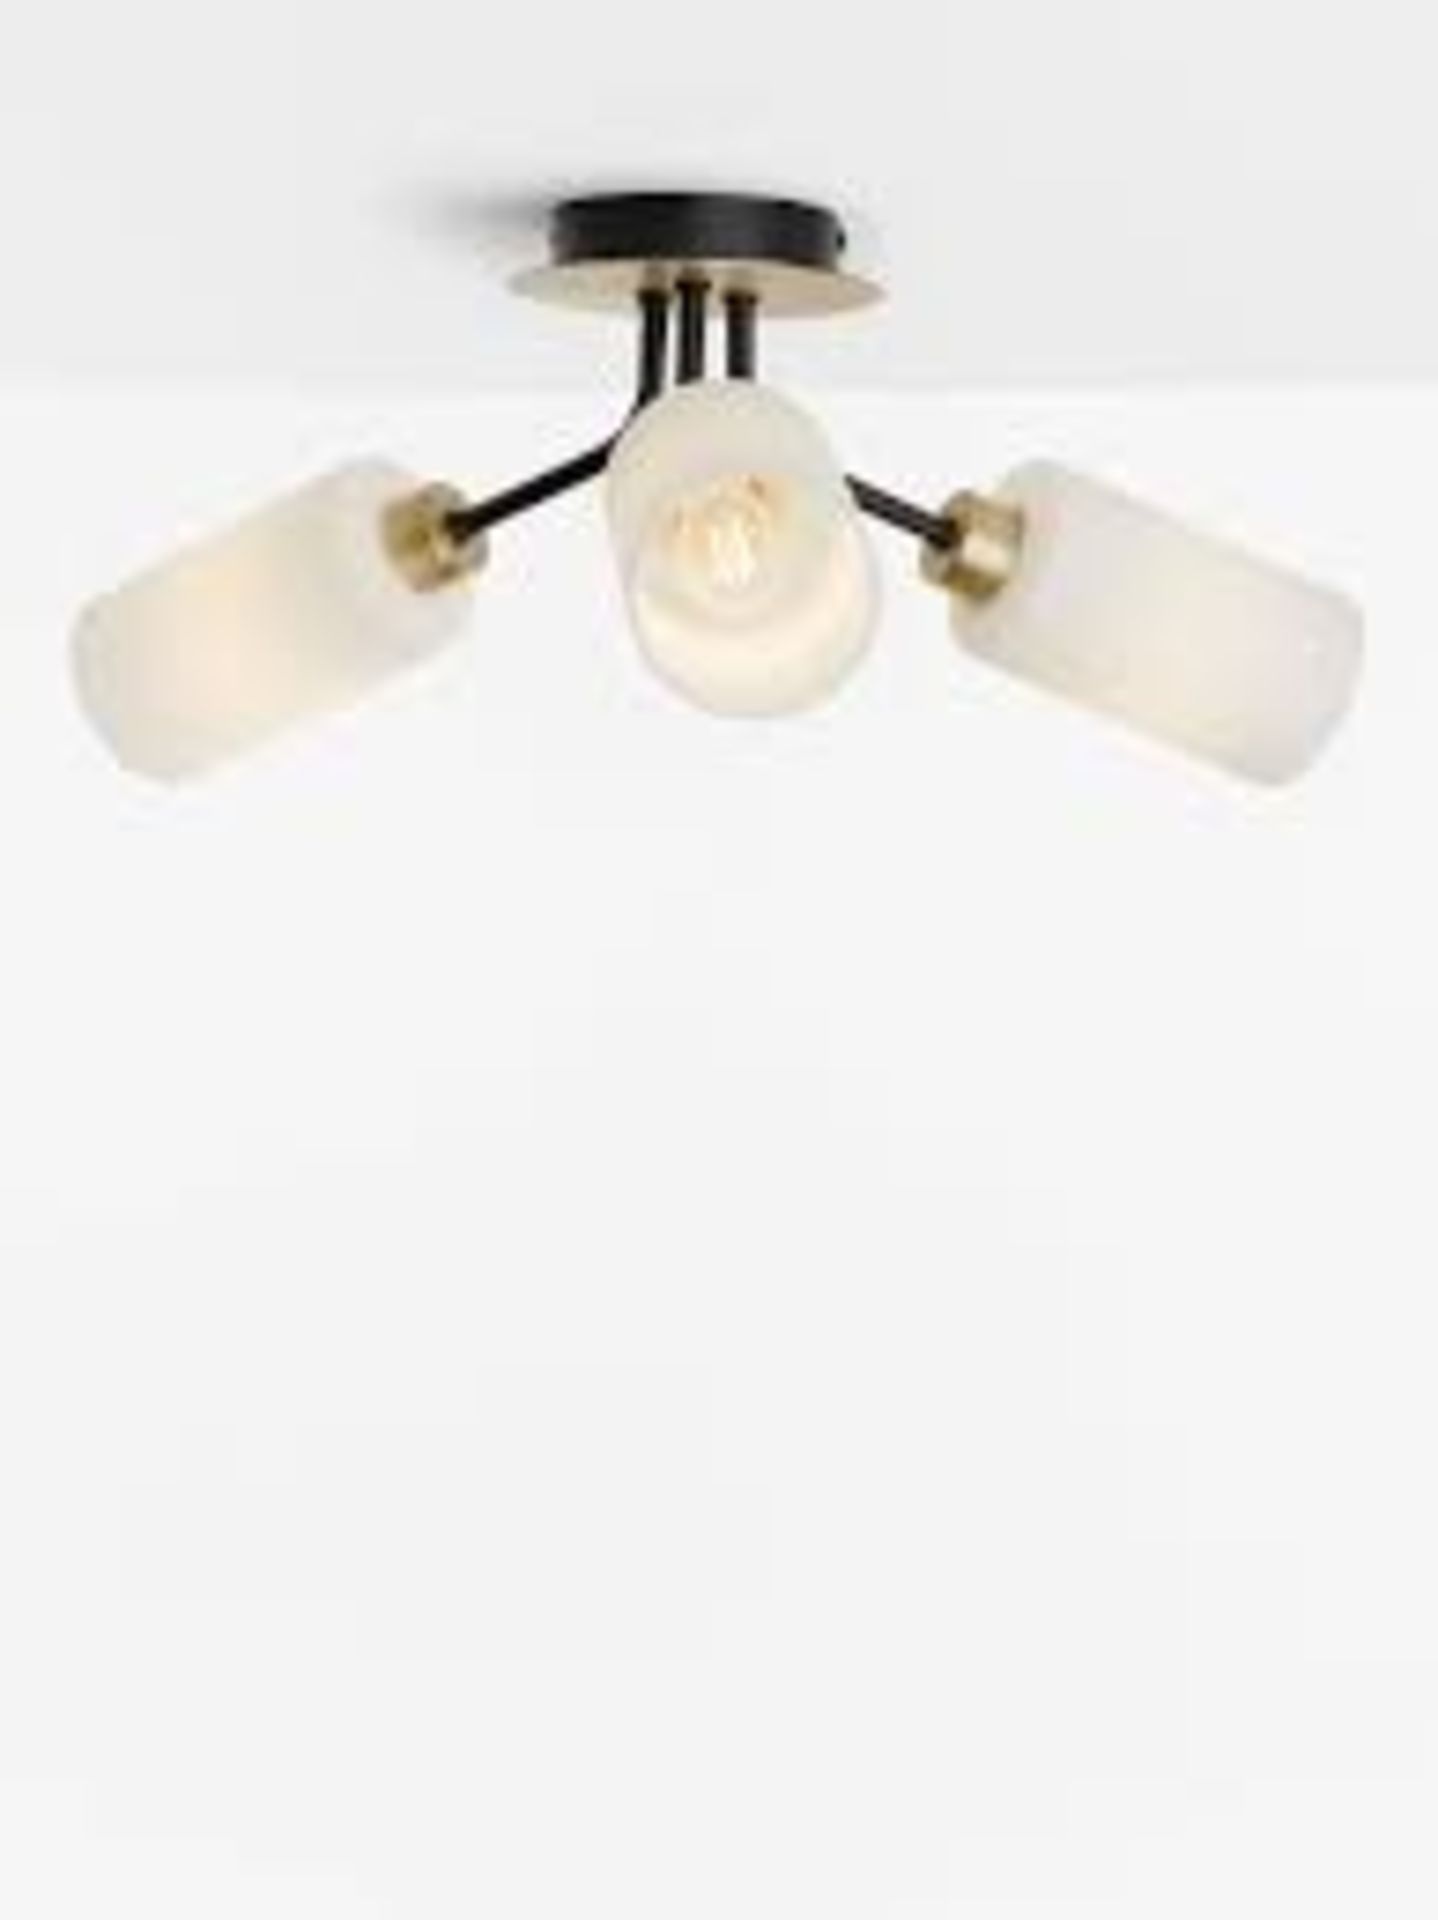 Boxed John Lewis And Partners 3 Light Semi Flush Ceiling Light RRP £80 (2635728) (Public Viewing and